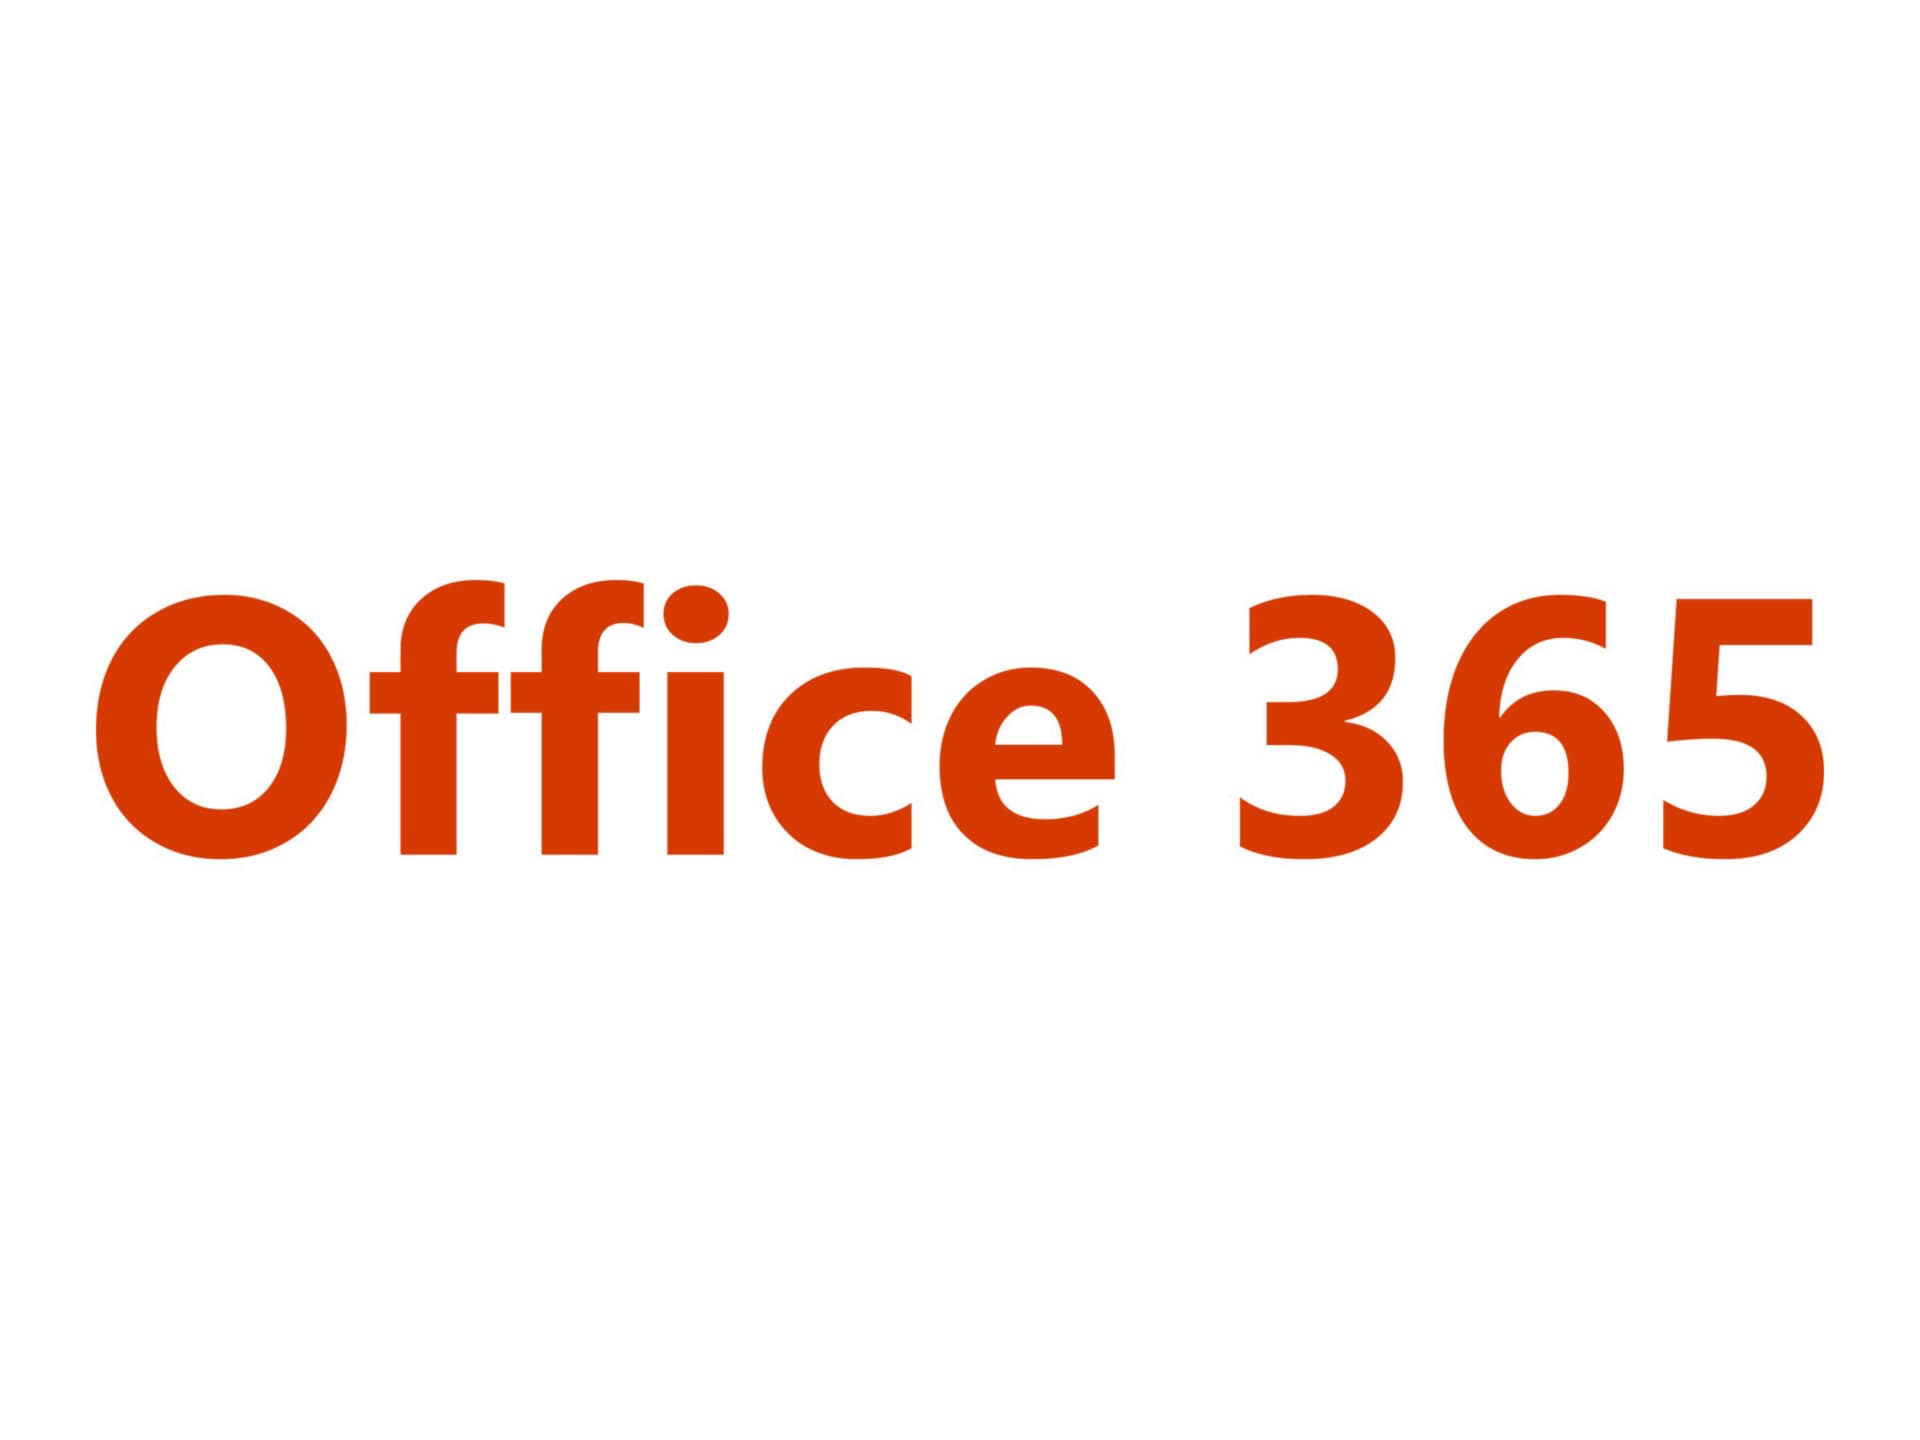 Microsoft Office 365 Enterprise F3 - subscription license (1 month) - 1 use